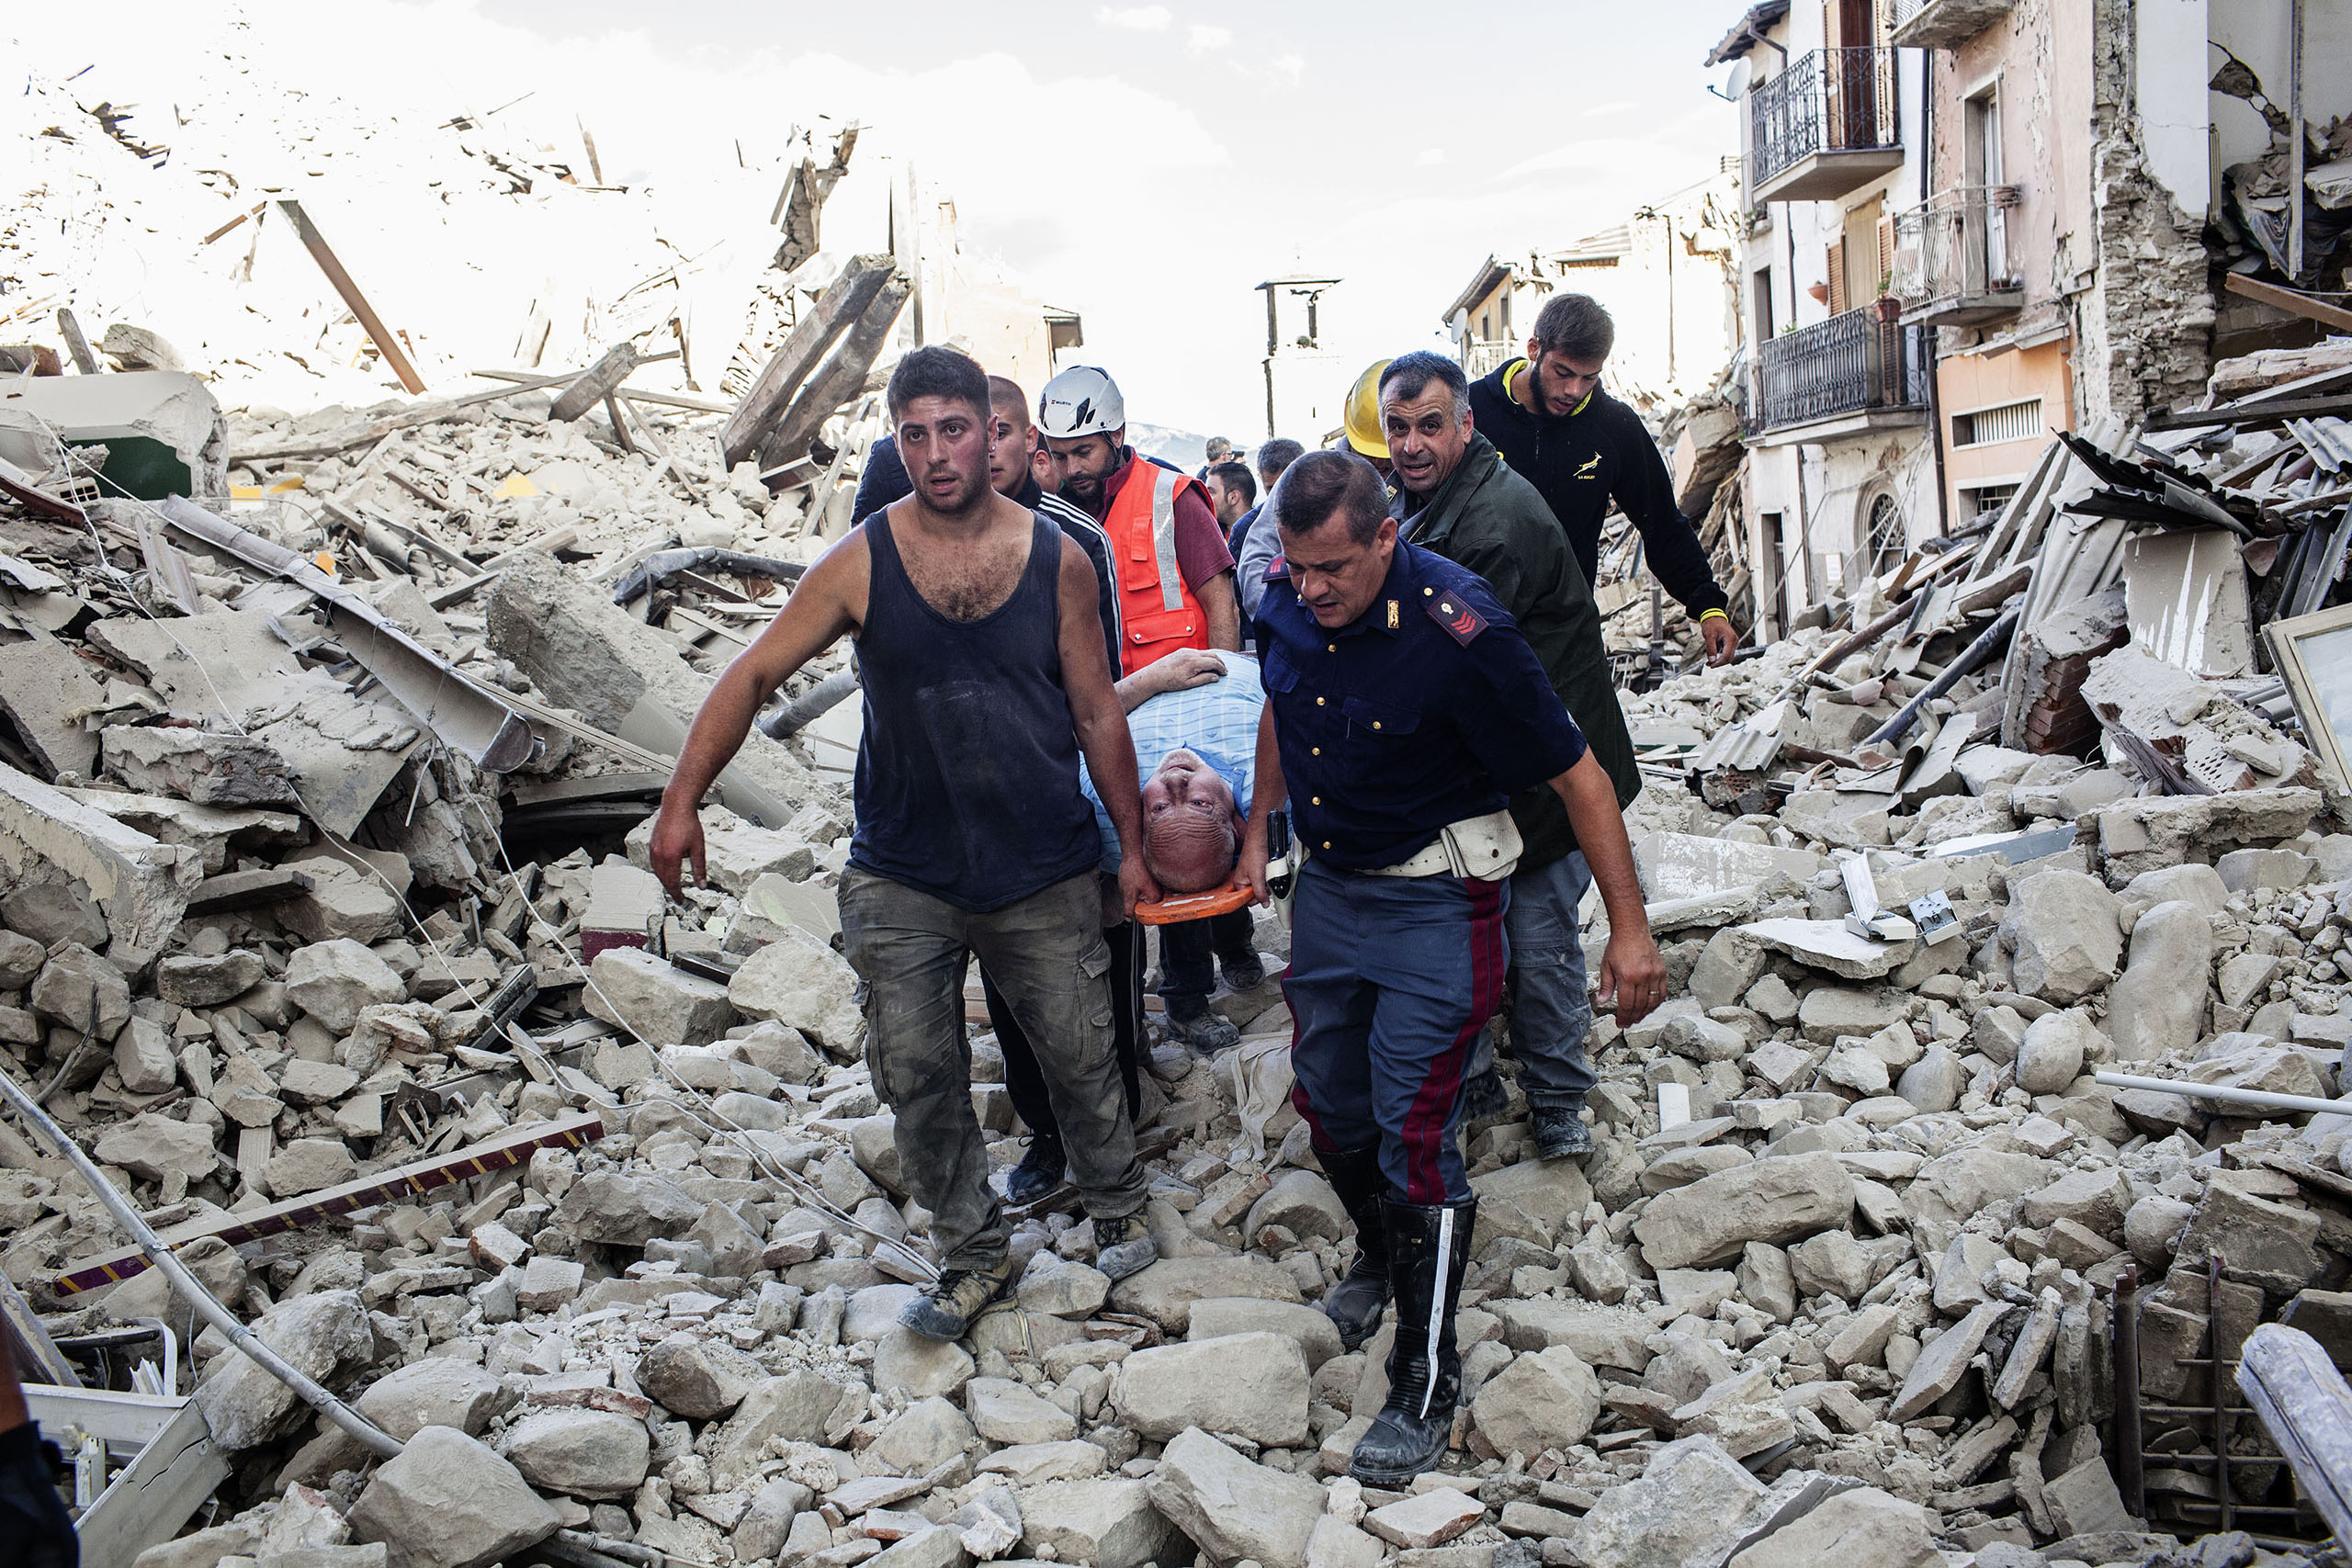 Rescue teams carry a man across the rubble of Amatrice, Italy, on Aug. 24, 2016.